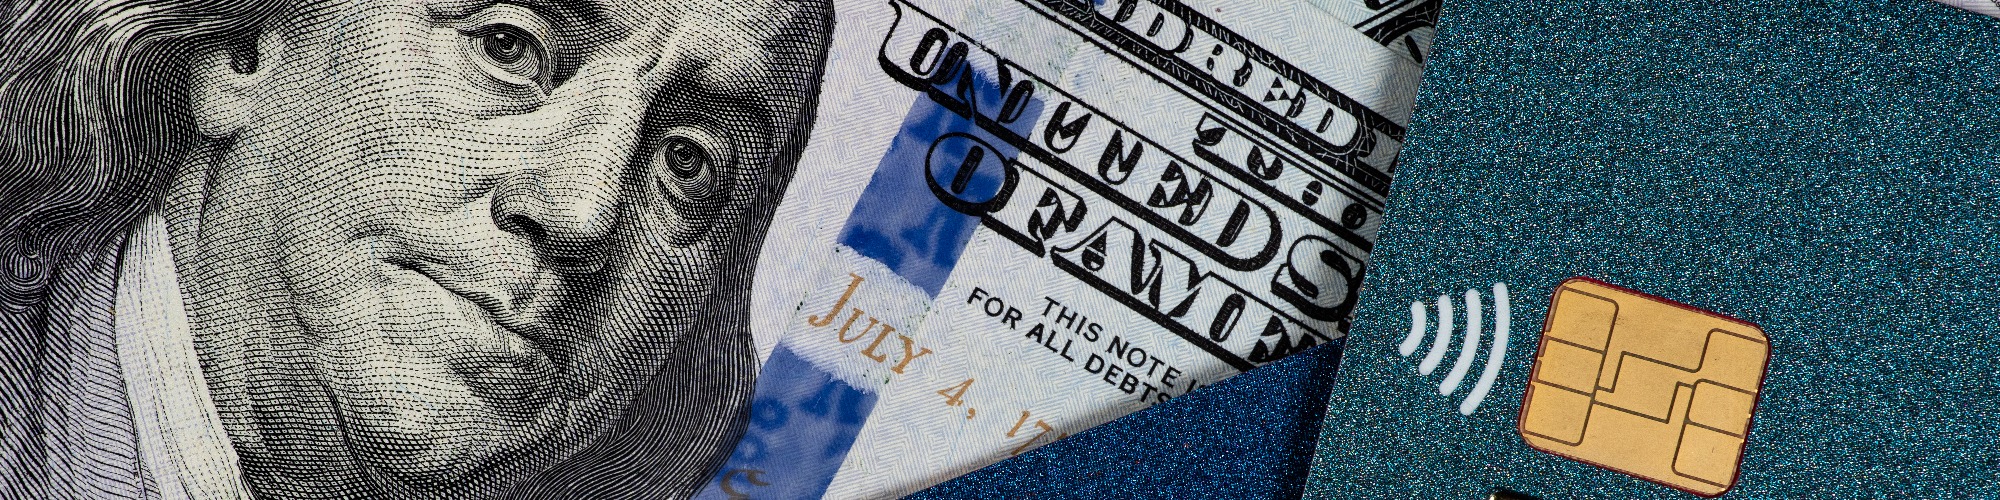 close up of a paper money and a card